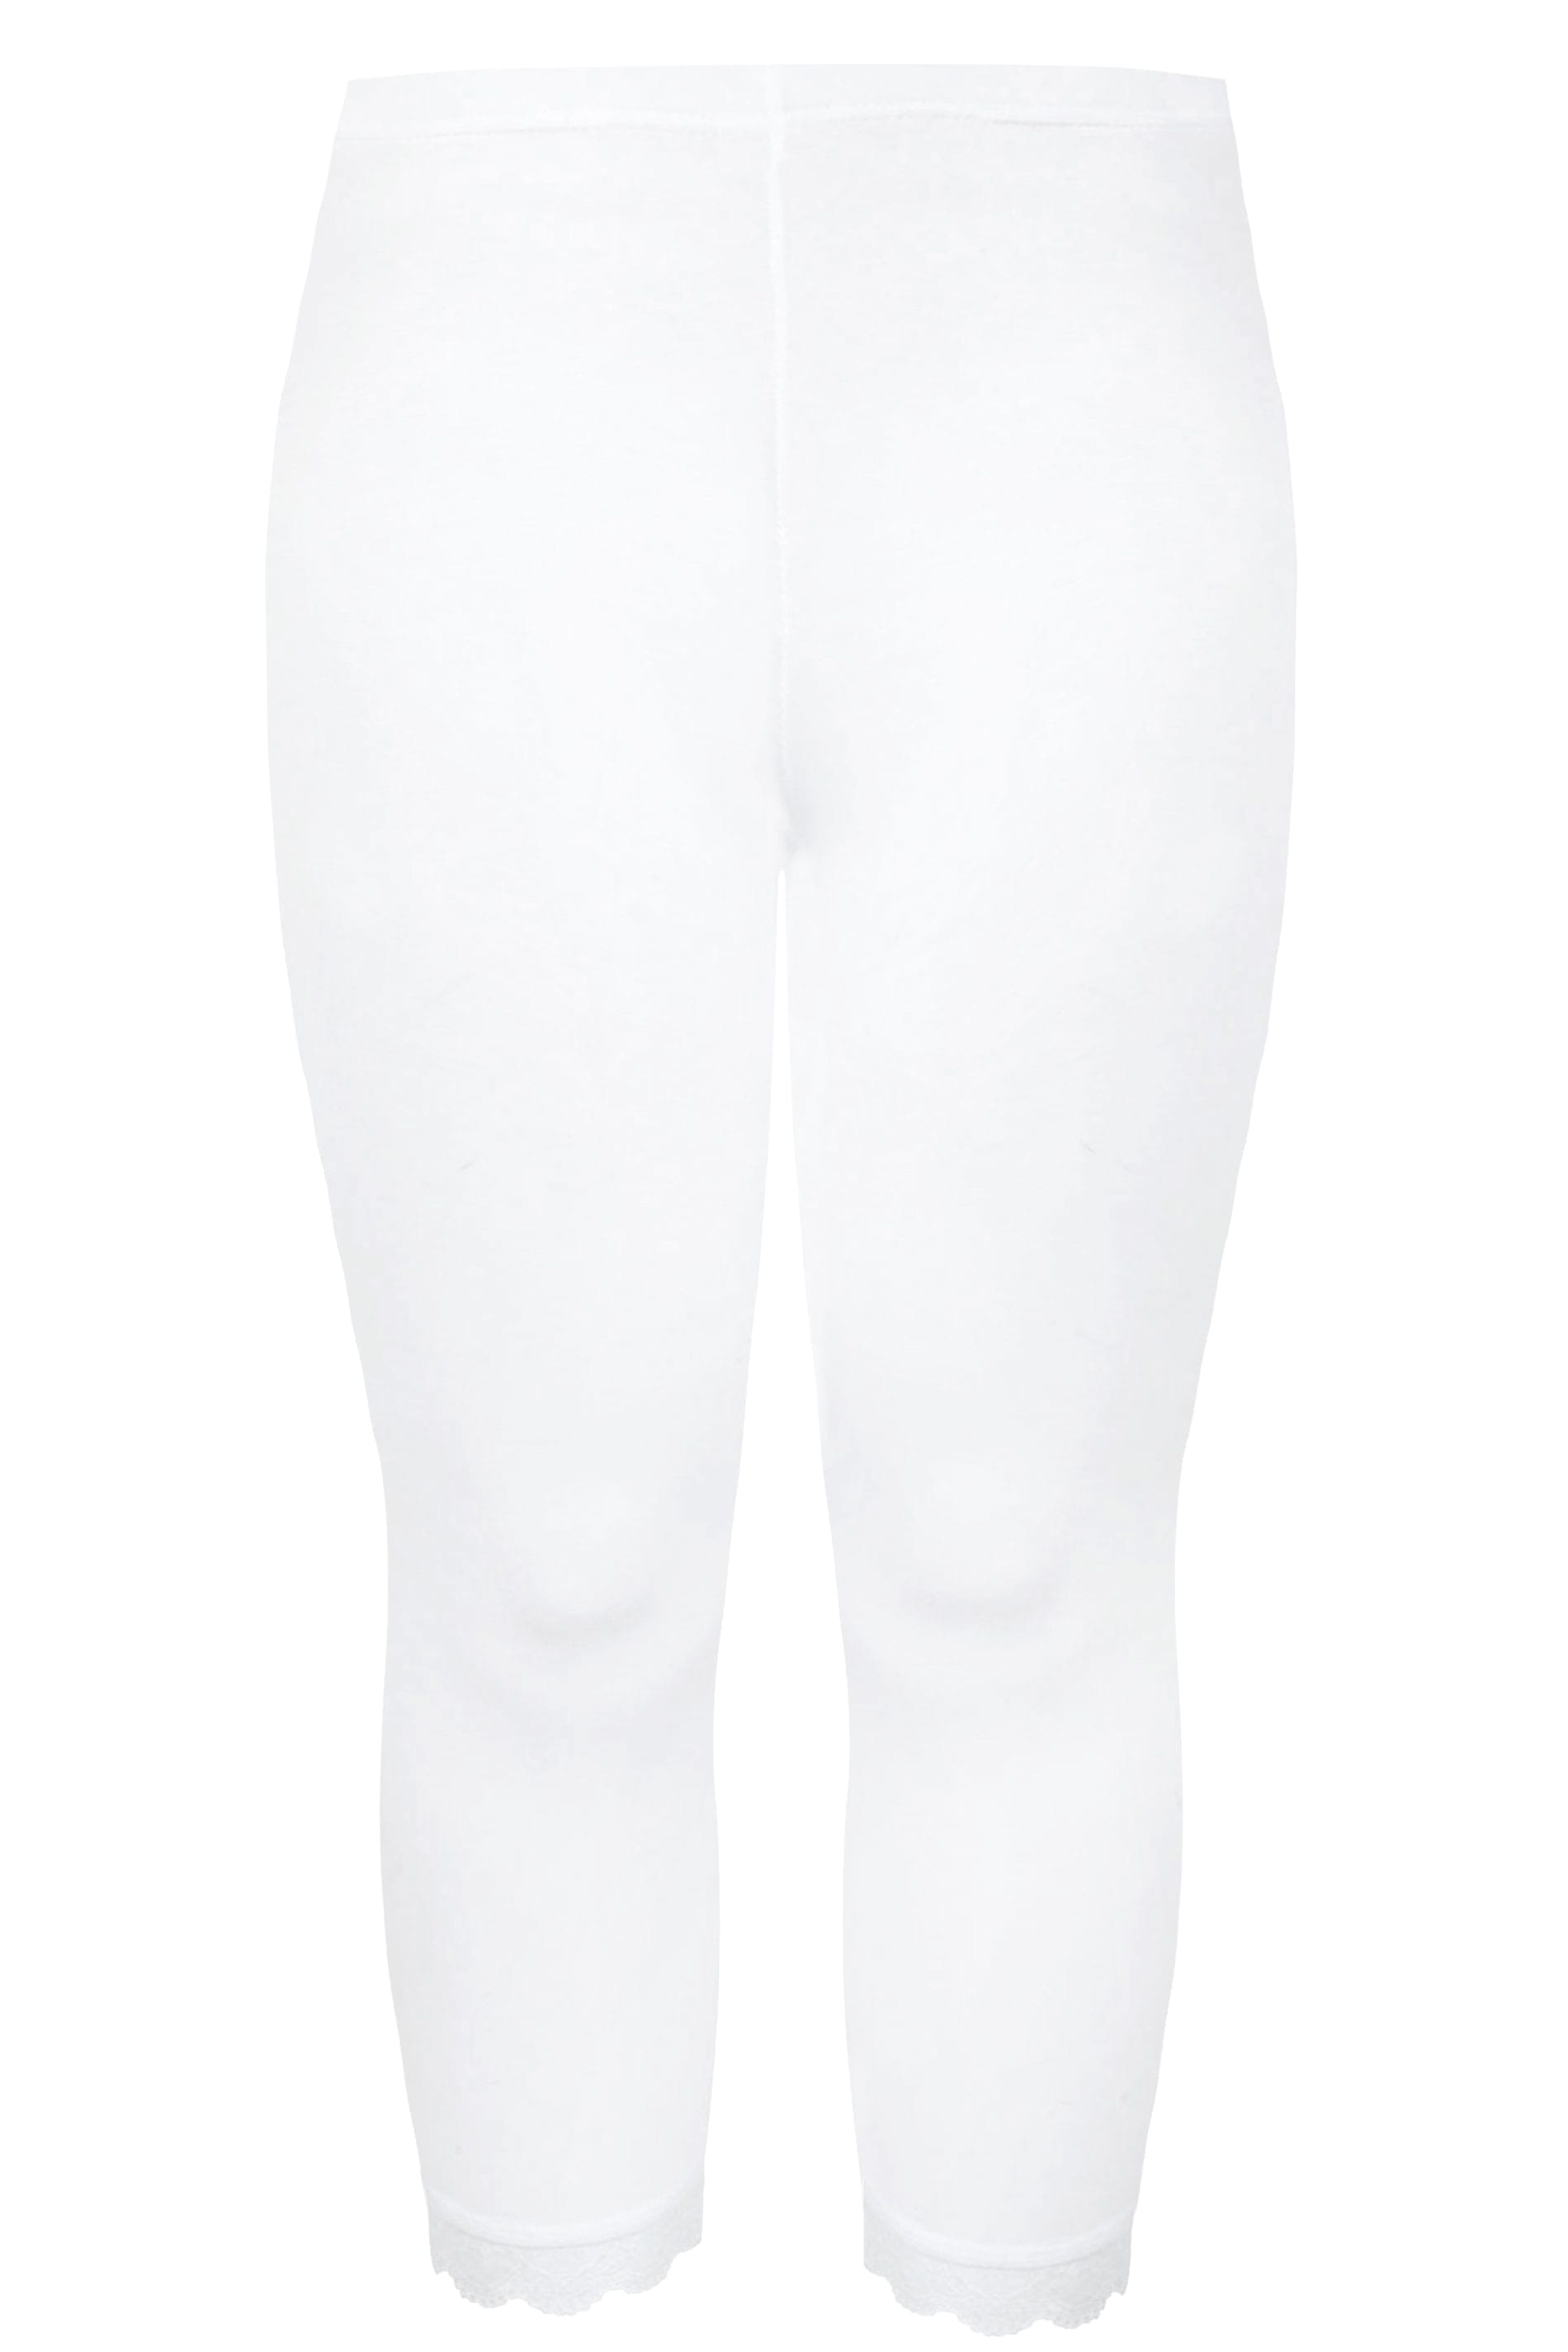 https://cdn.yoursclothing.com/Images/ProductImages/White_Cotton_Essential_Cropped_Leggings_With_Lace_Detail_057189_7d76.jpg